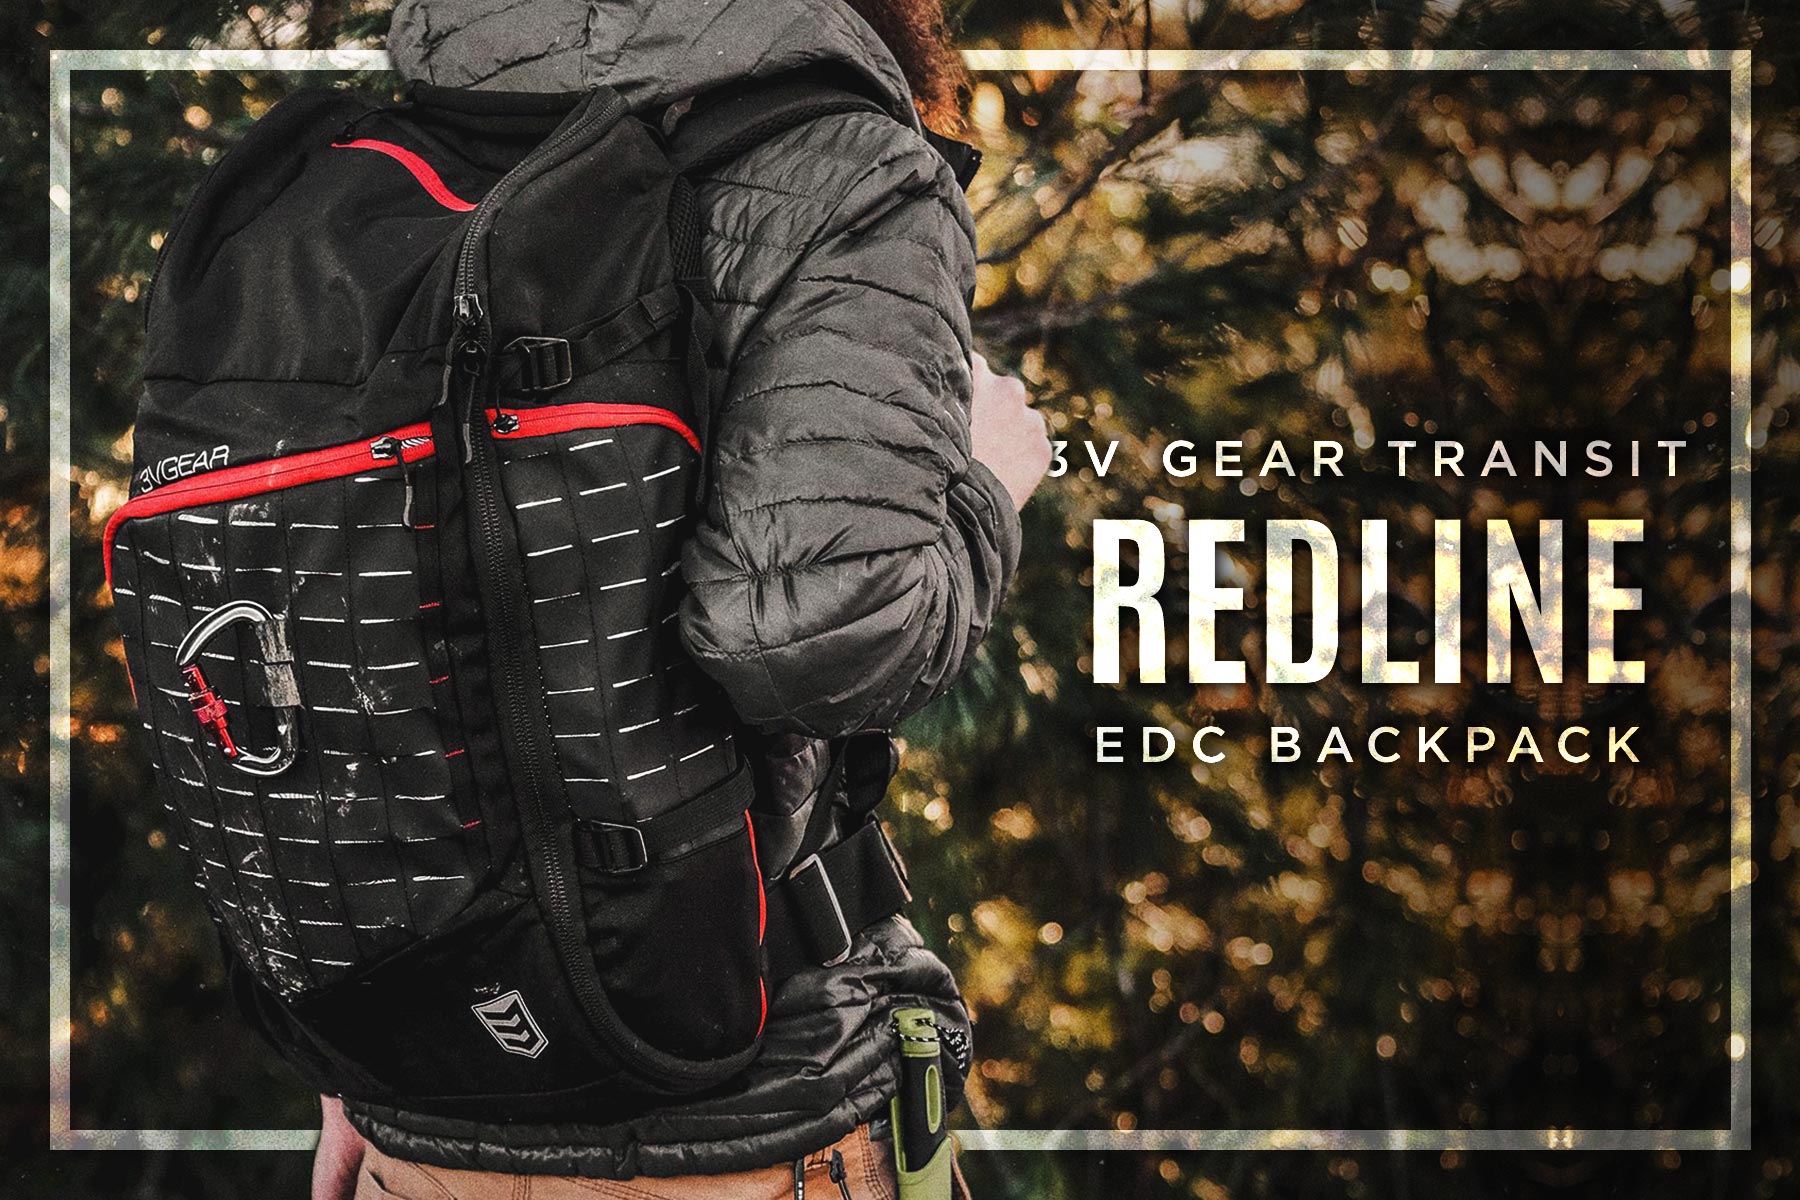 Always Be Ready: How to Choose a Basic EDC Backpack